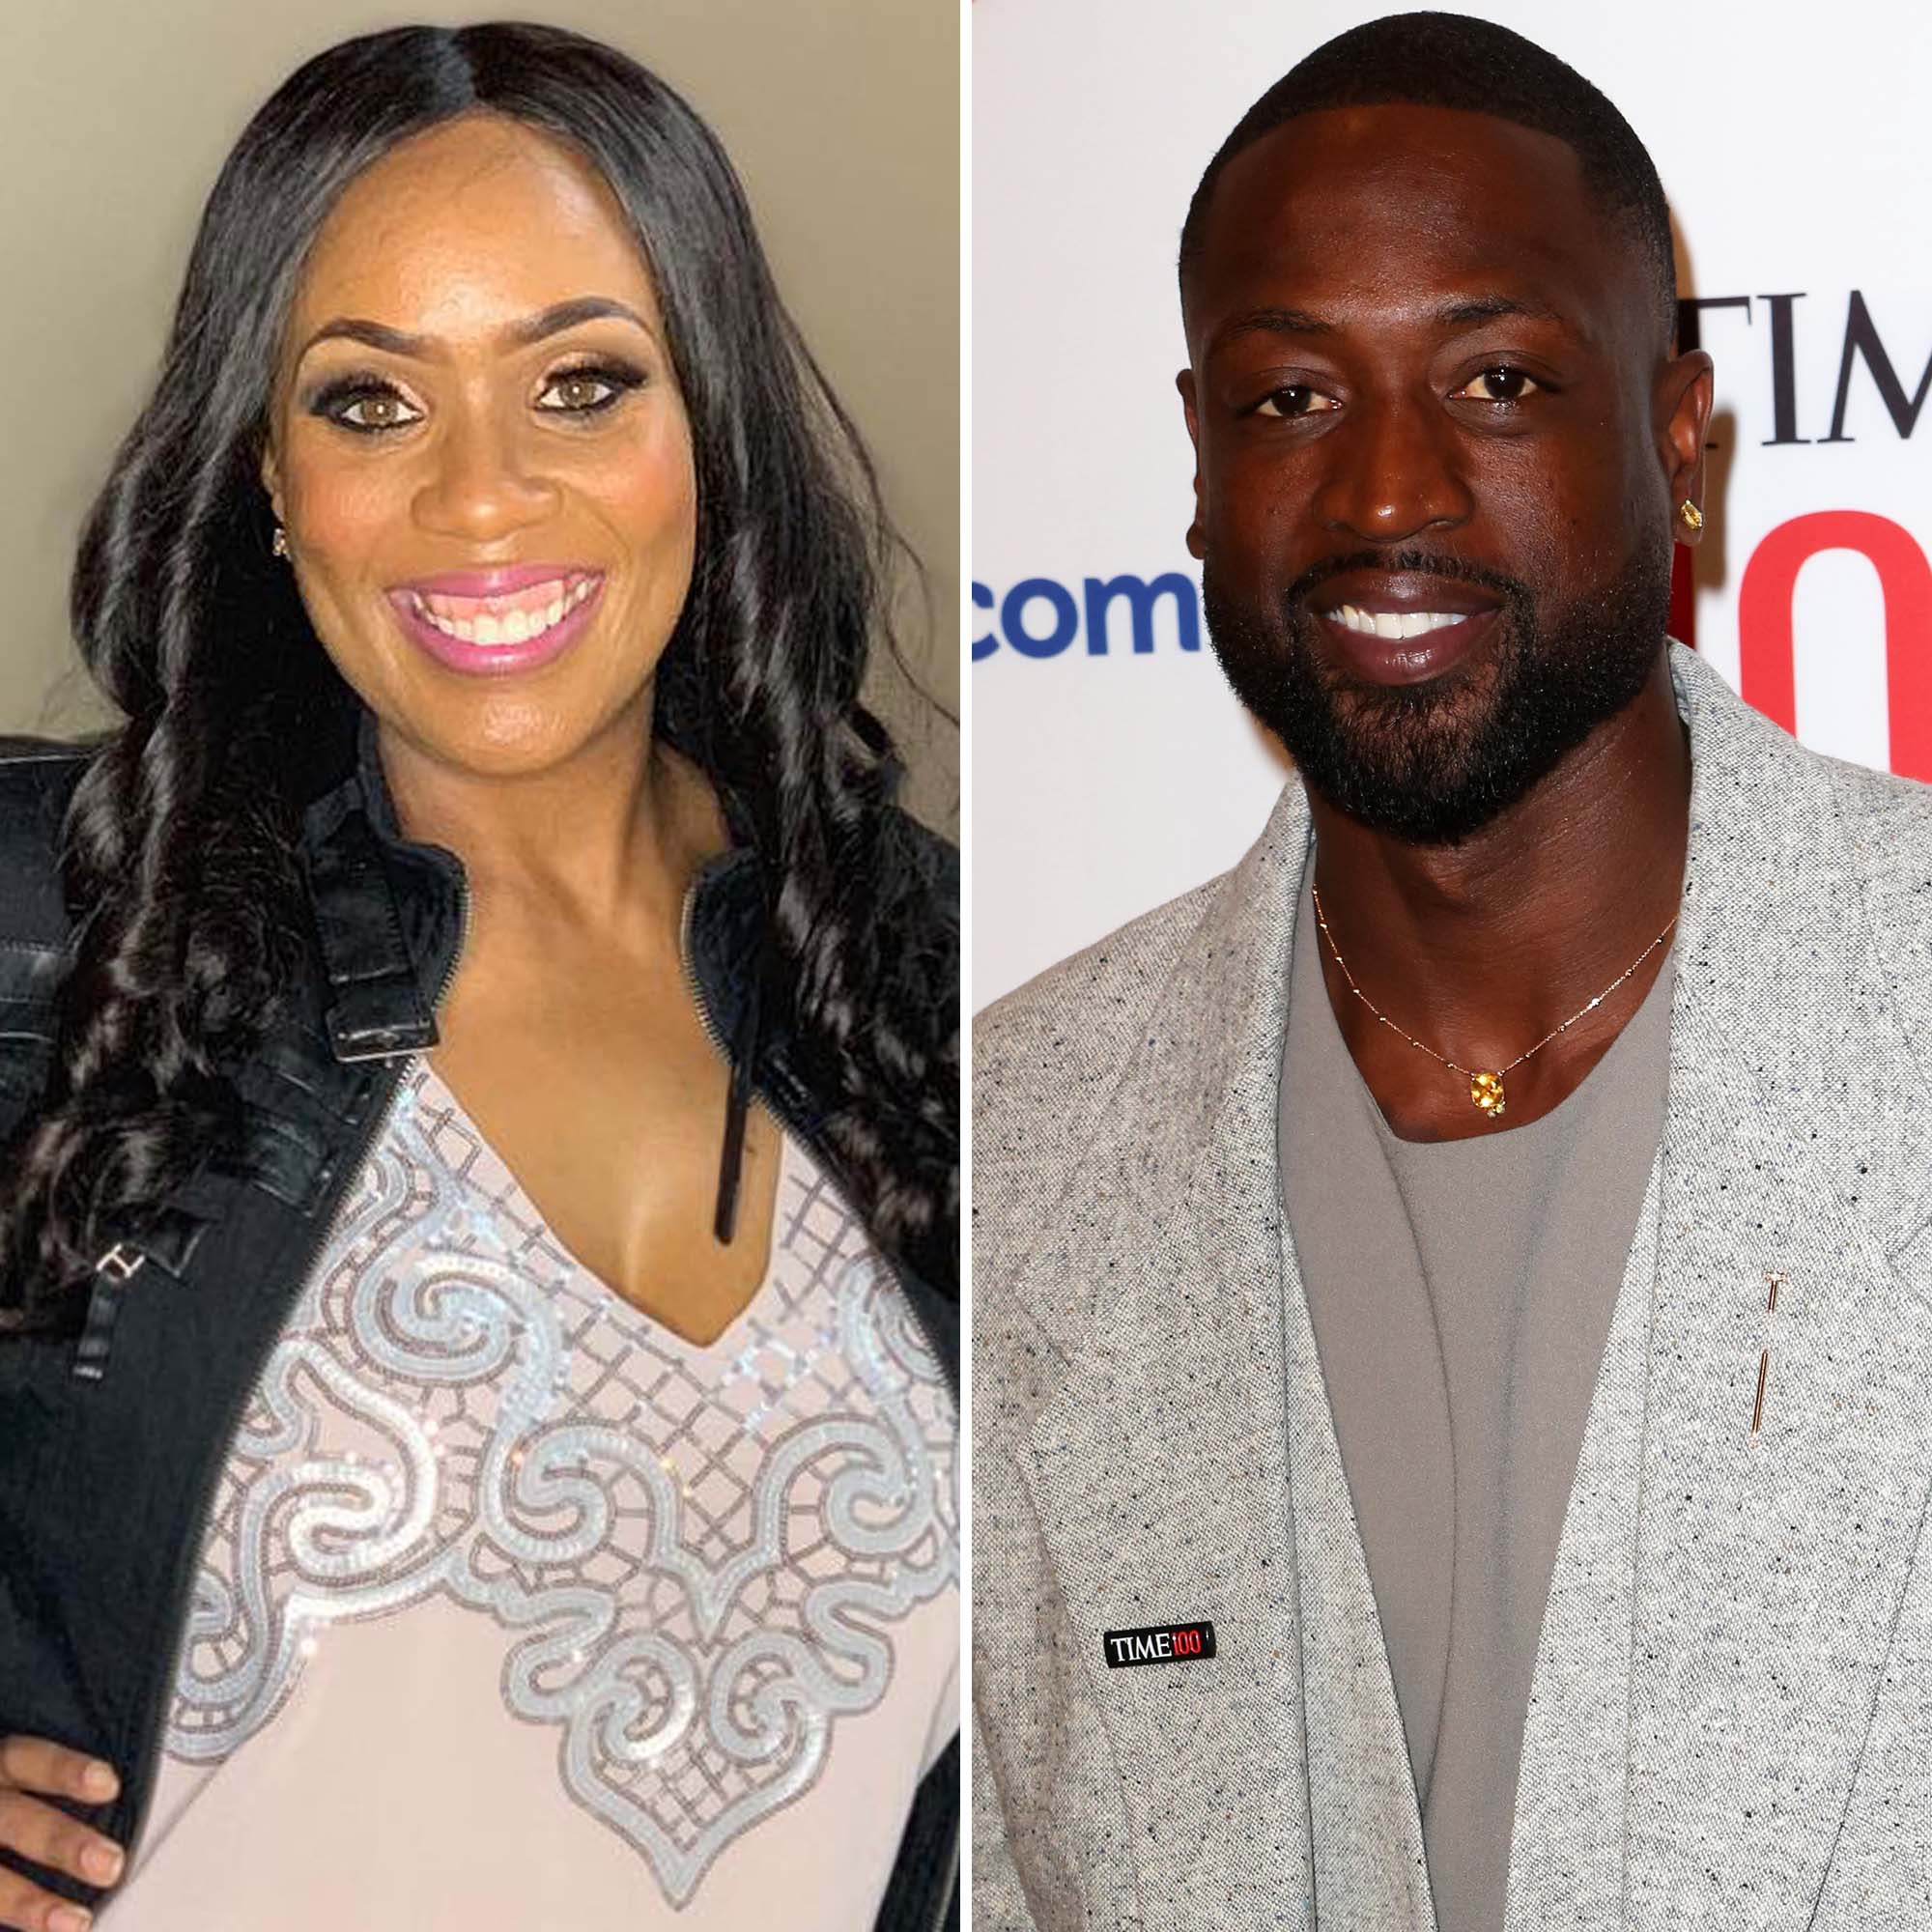 Dwyane Wades Ex-Wife Siohvaughn Funches 5 Things to Know